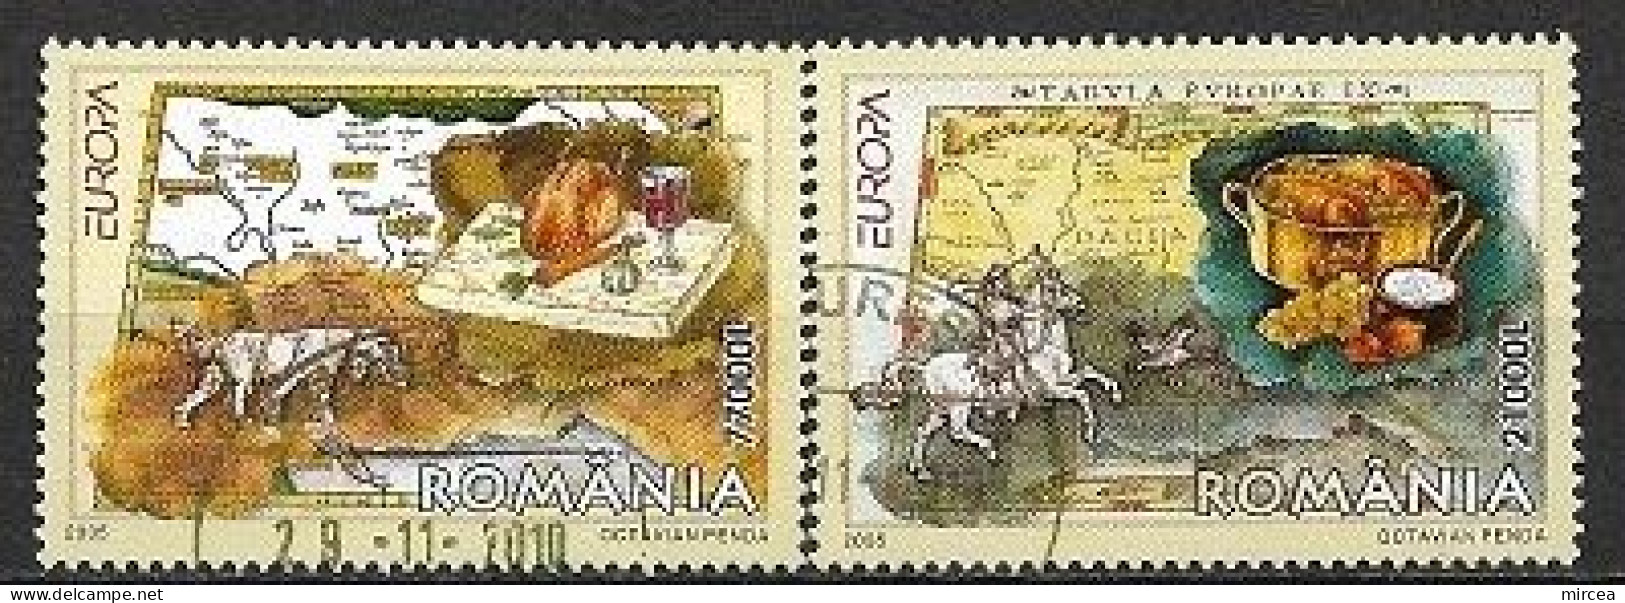 C3971 - Roumanie 2005 - Europa 2v.obliteres - Used Stamps